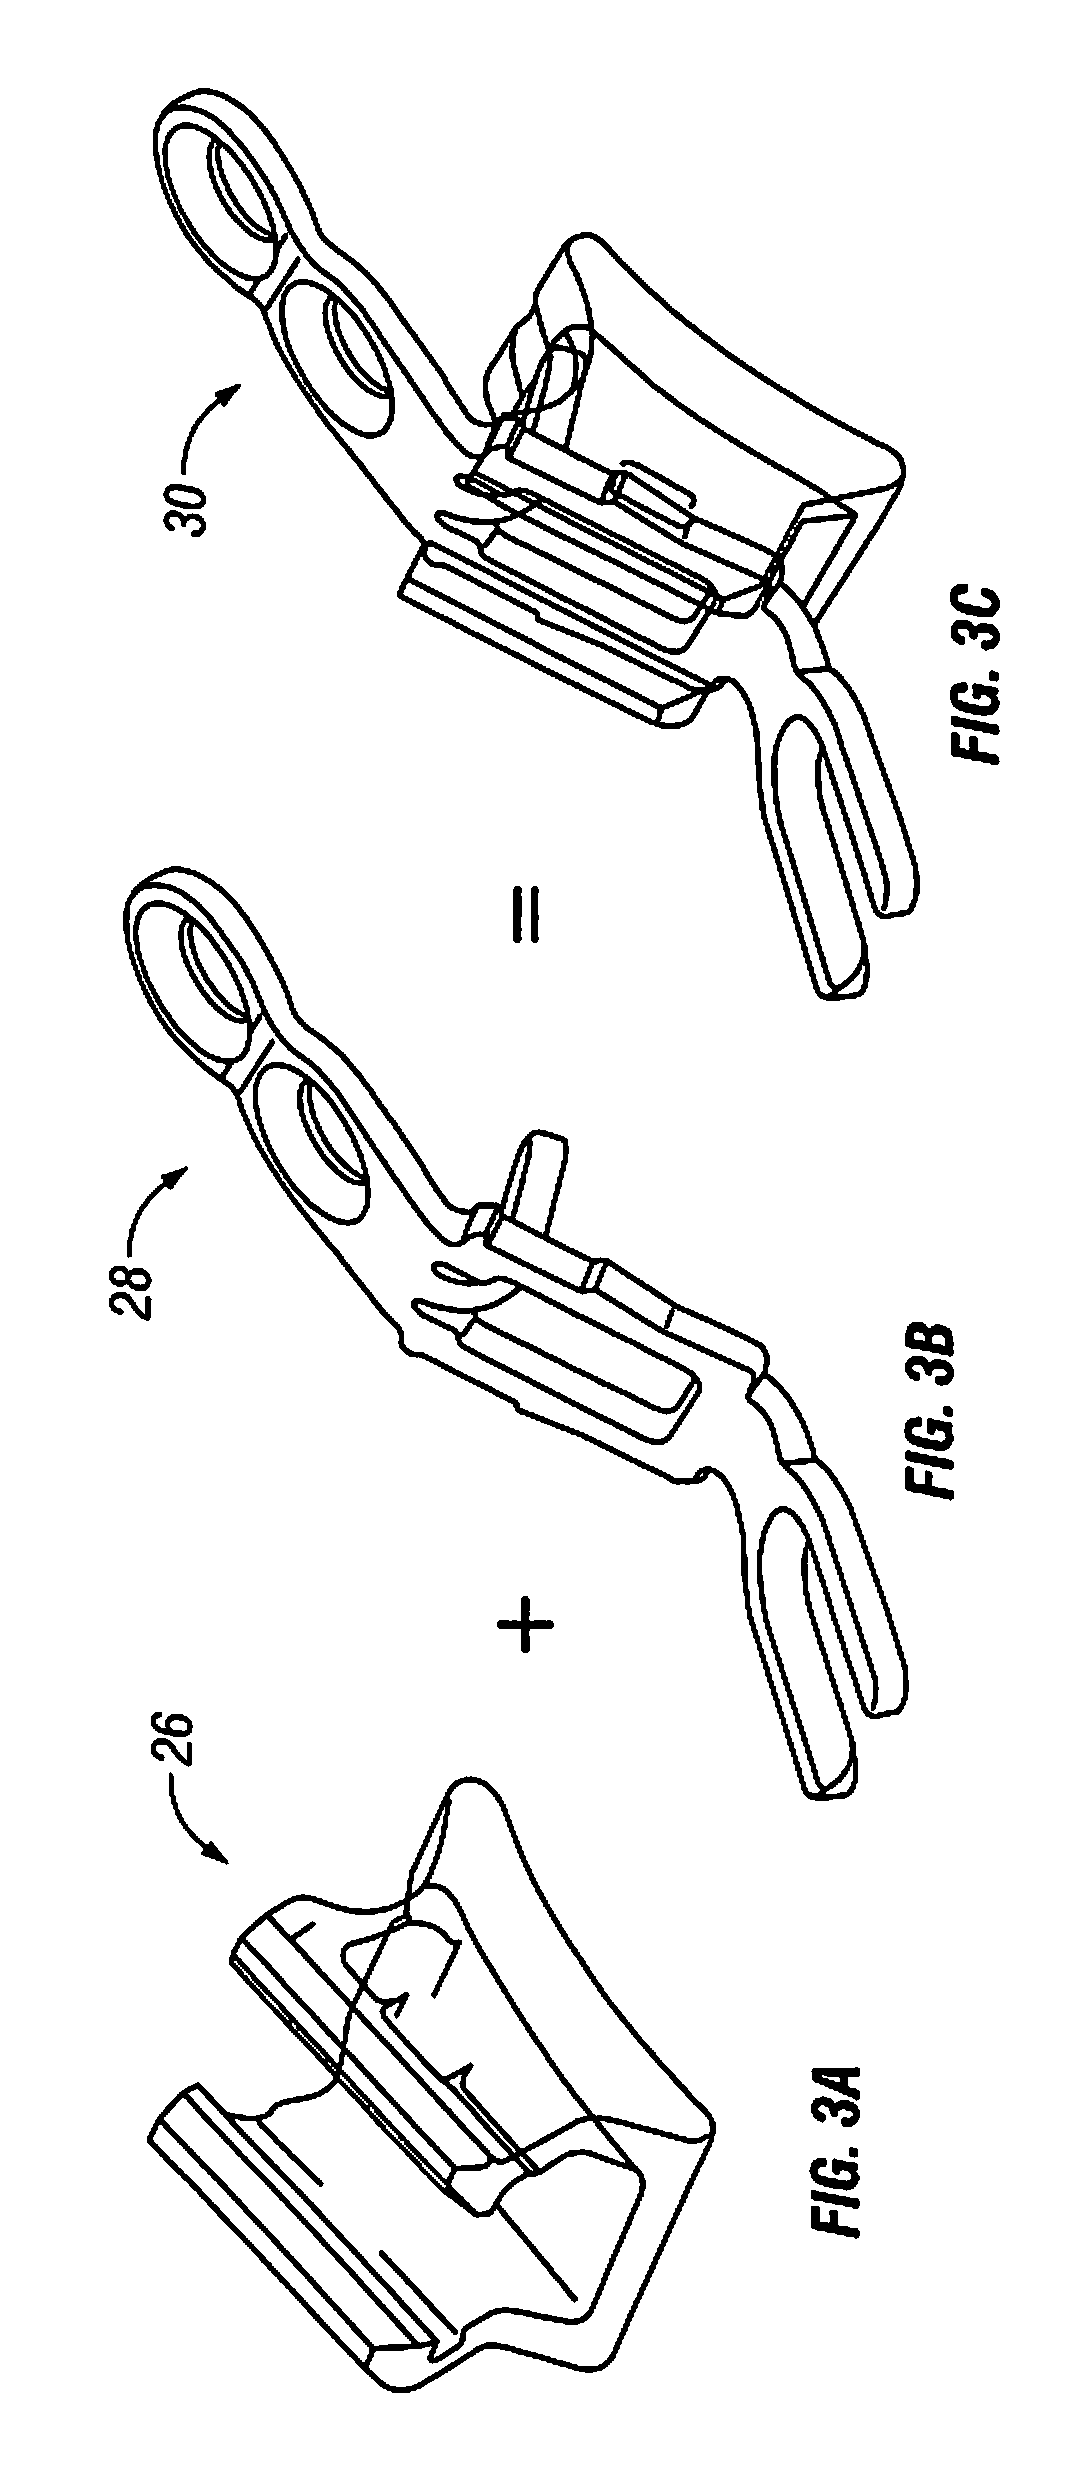 Laminoplasty plates, systems, and devices, and methods relating to the same